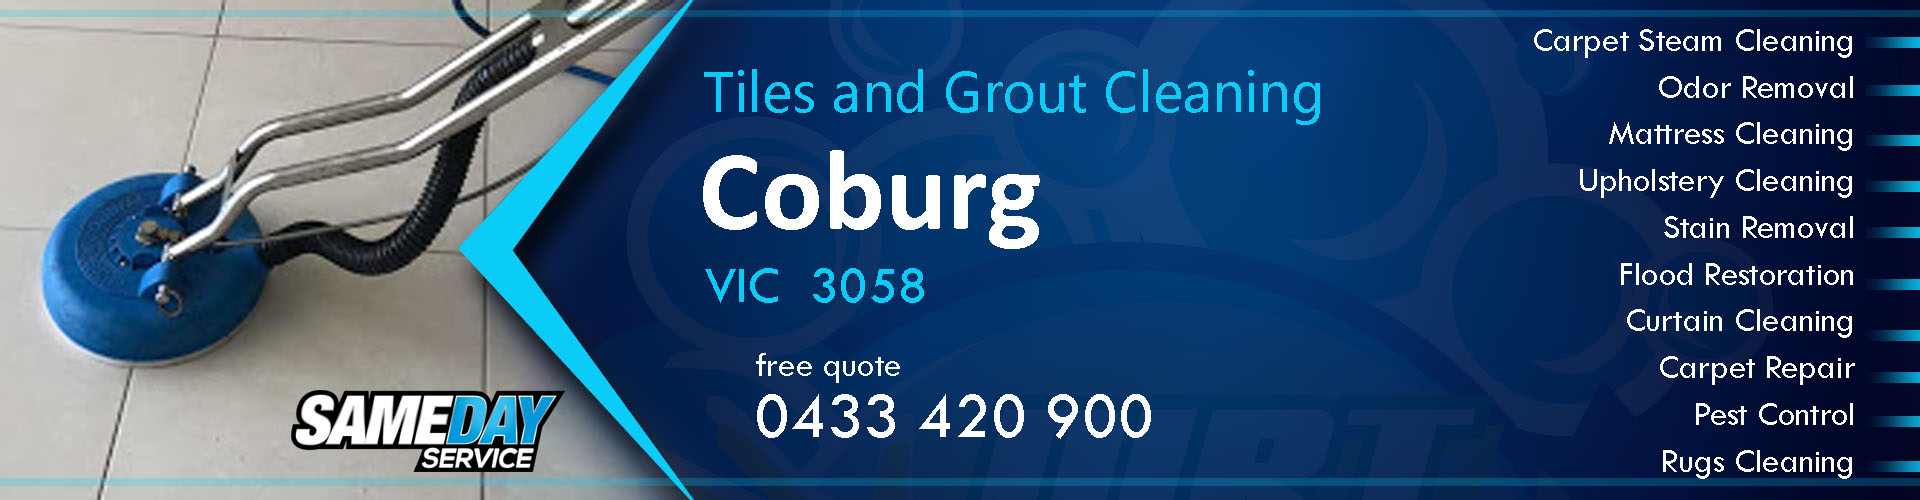 Tiles and Grout Cleaning Coburg | 1300 347 825